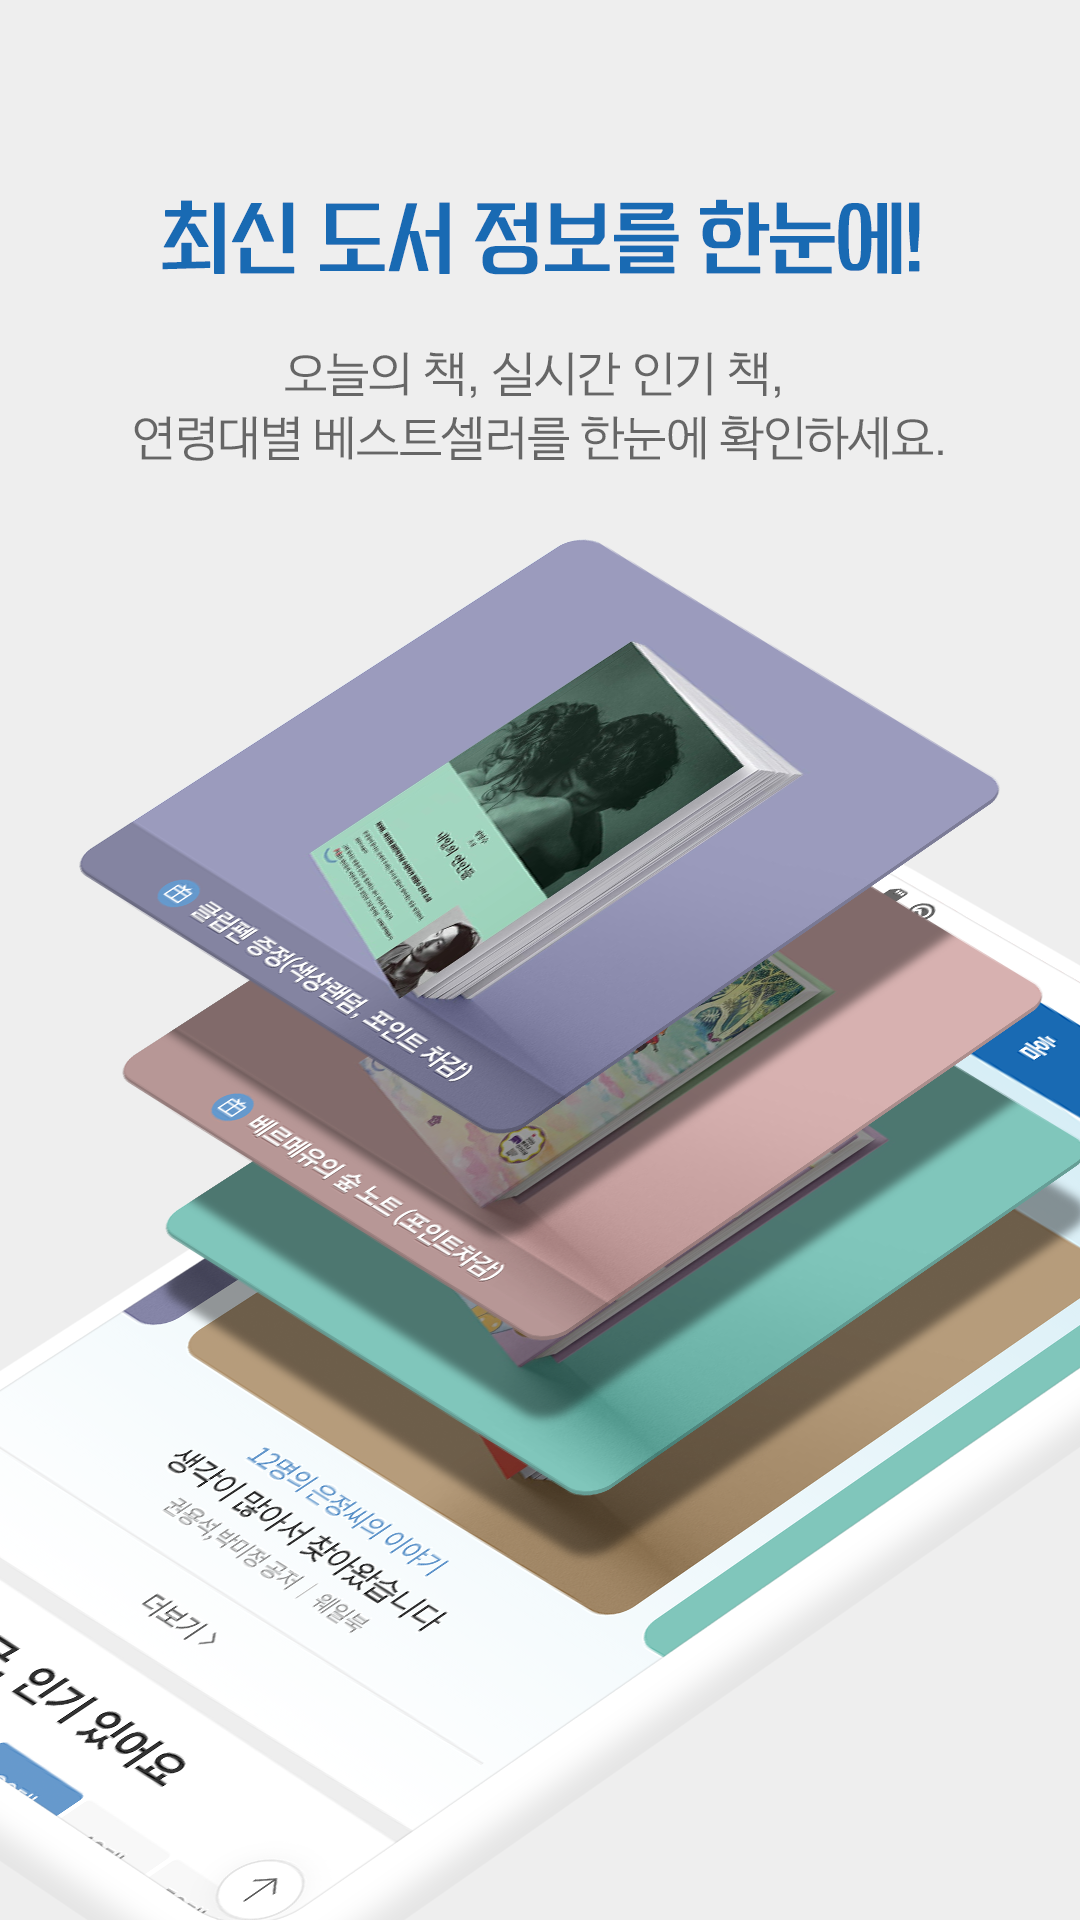 Android application 예스24 도서 서점 screenshort